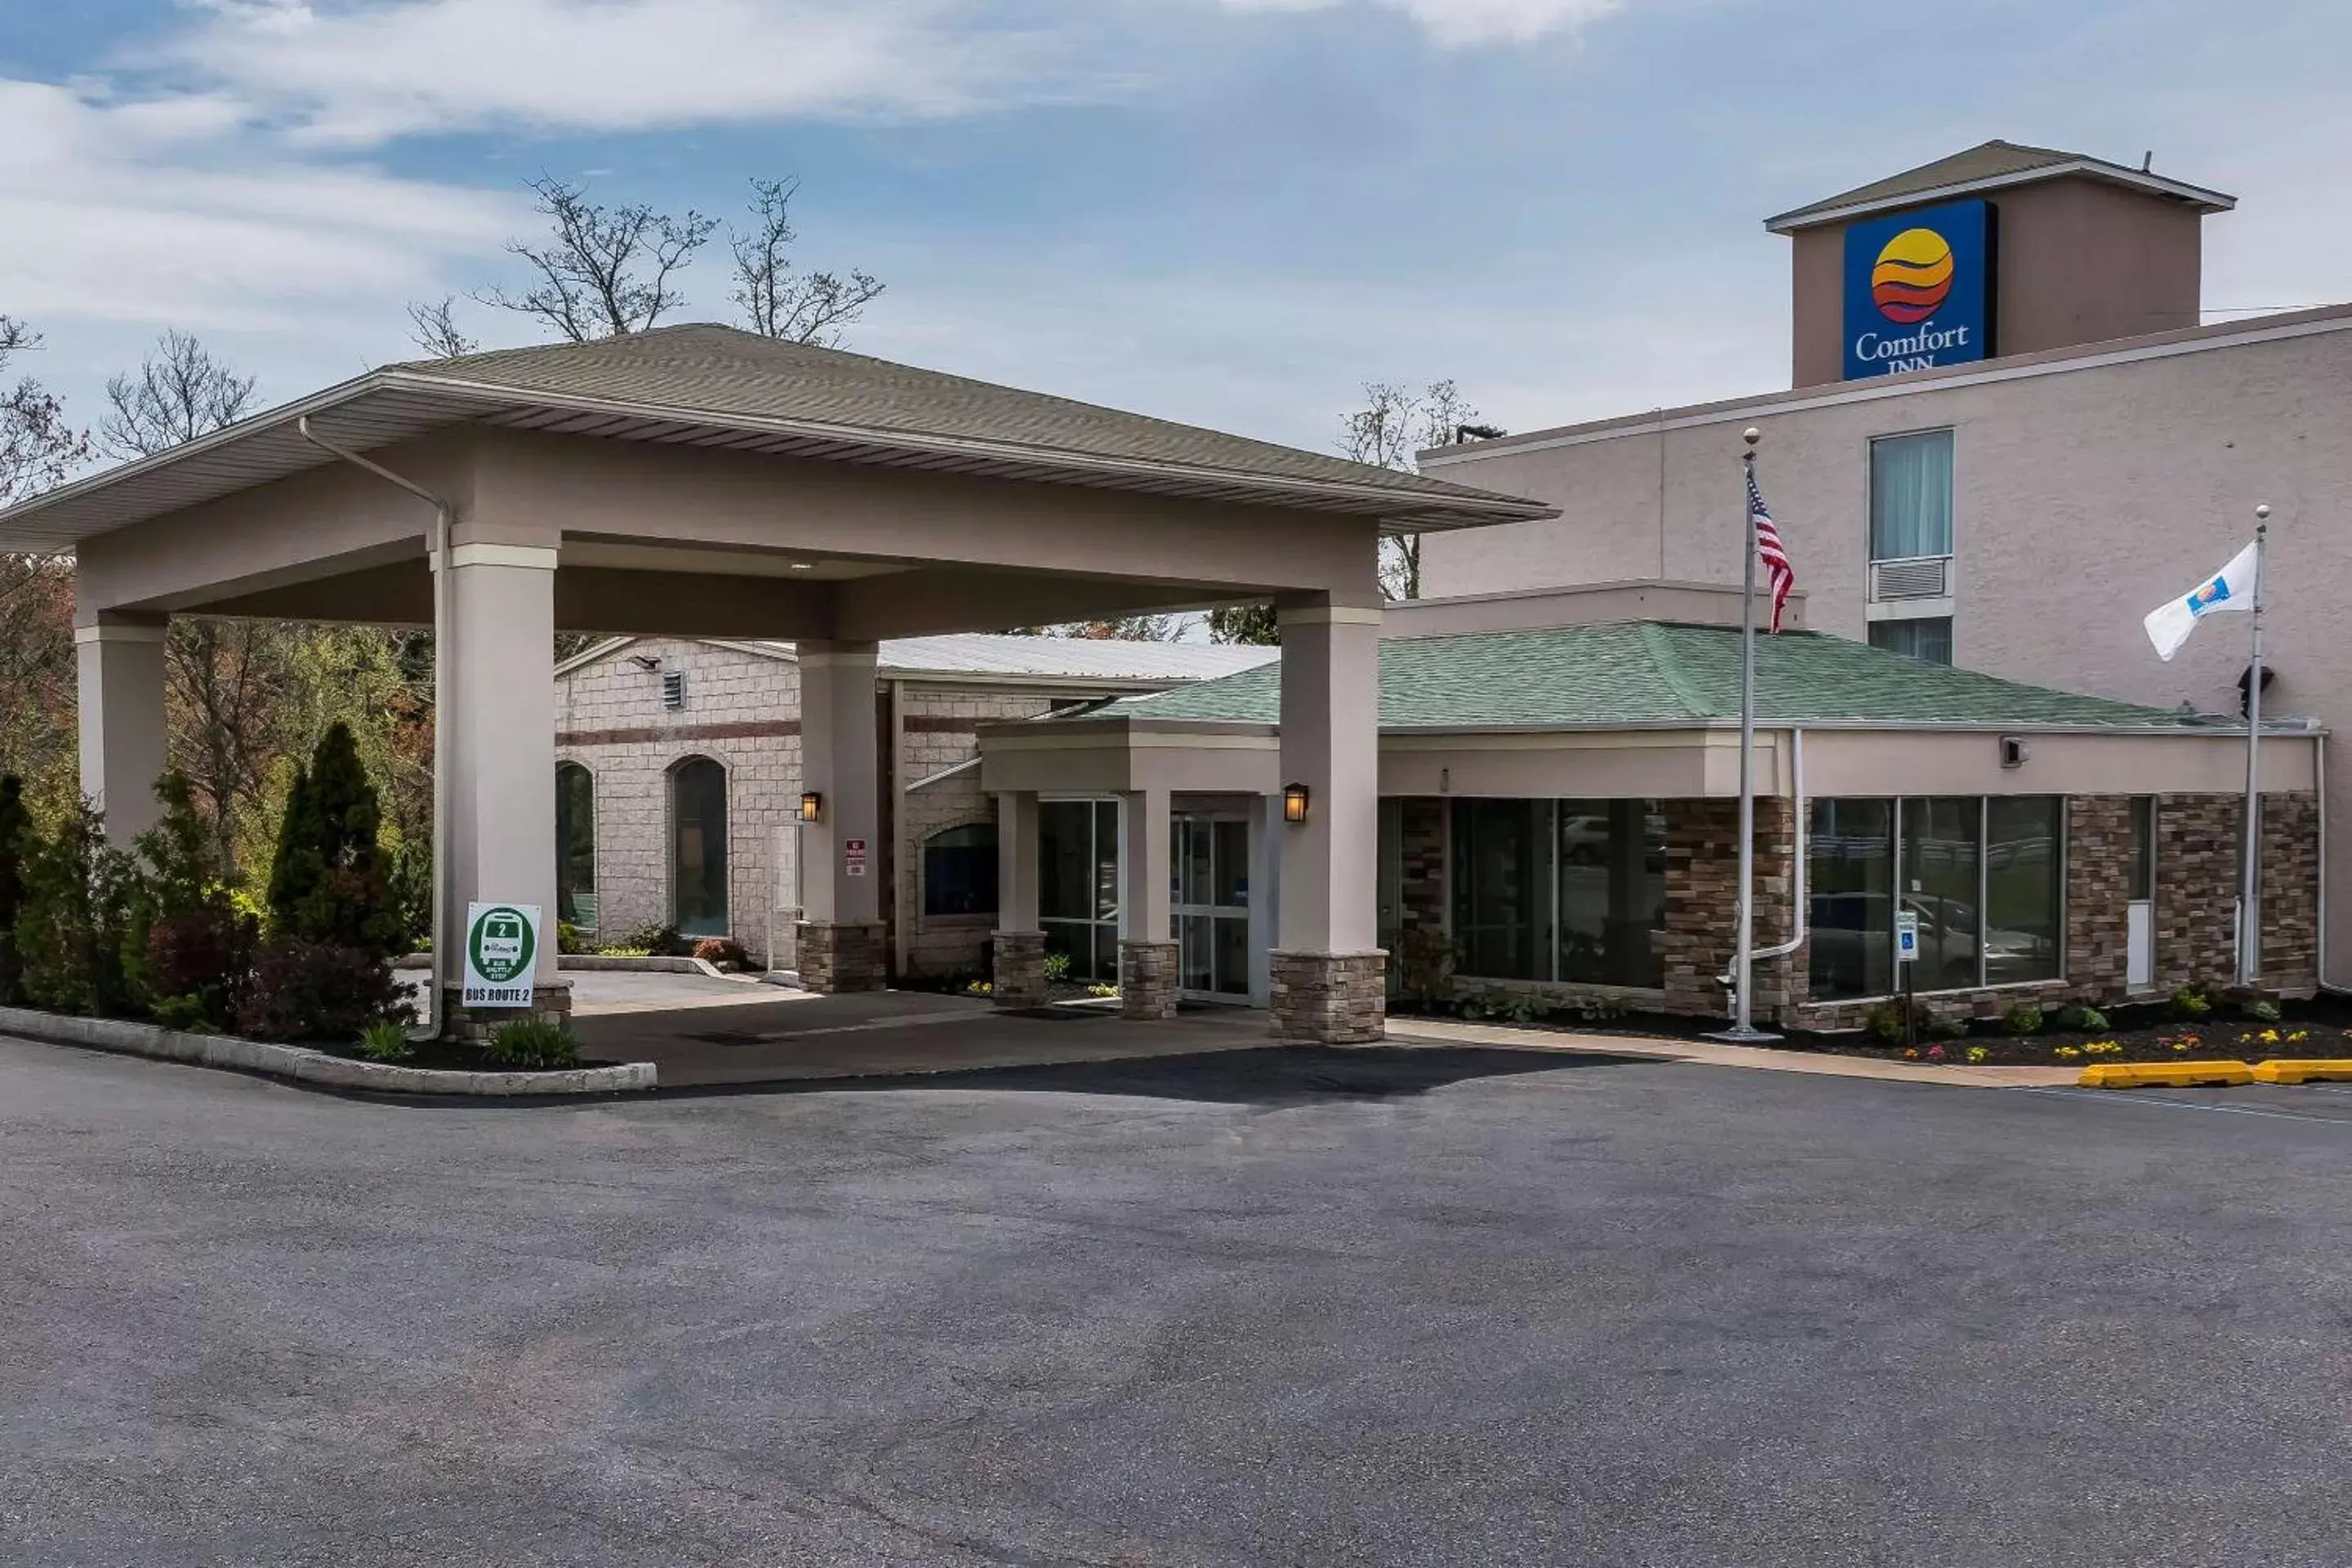 Property building in Comfort Inn - Pocono Mountains